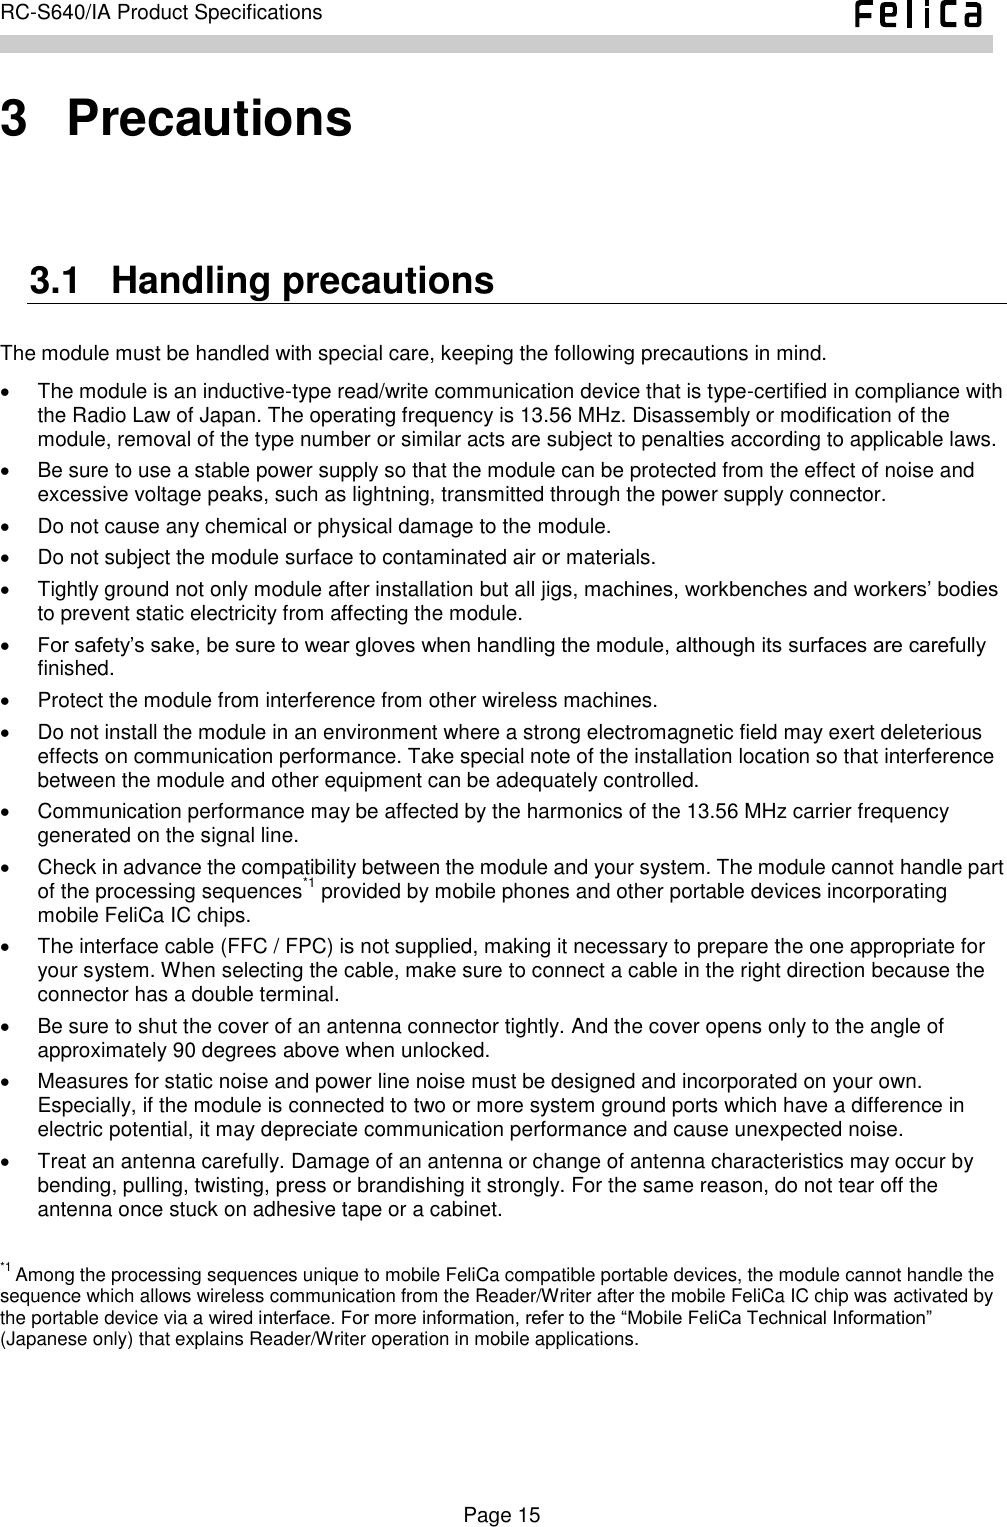    Page 15     RC-S640/IA Product Specifications    3   Precautions 3.1   Handling precautions The module must be handled with special care, keeping the following precautions in mind.   The module is an inductive-type read/write communication device that is type-certified in compliance with the Radio Law of Japan. The operating frequency is 13.56 MHz. Disassembly or modification of the module, removal of the type number or similar acts are subject to penalties according to applicable laws.   Be sure to use a stable power supply so that the module can be protected from the effect of noise and excessive voltage peaks, such as lightning, transmitted through the power supply connector.   Do not cause any chemical or physical damage to the module.   Do not subject the module surface to contaminated air or materials.   Tightly ground not only module after installation but all jigs, machines, workbenches and workers’ bodies to prevent static electricity from affecting the module.  For safety’s sake, be sure to wear gloves when handling the module, although its surfaces are carefully finished.   Protect the module from interference from other wireless machines.   Do not install the module in an environment where a strong electromagnetic field may exert deleterious effects on communication performance. Take special note of the installation location so that interference between the module and other equipment can be adequately controlled.   Communication performance may be affected by the harmonics of the 13.56 MHz carrier frequency generated on the signal line.   Check in advance the compatibility between the module and your system. The module cannot handle part of the processing sequences*1 provided by mobile phones and other portable devices incorporating mobile FeliCa IC chips.   The interface cable (FFC / FPC) is not supplied, making it necessary to prepare the one appropriate for your system. When selecting the cable, make sure to connect a cable in the right direction because the connector has a double terminal.   Be sure to shut the cover of an antenna connector tightly. And the cover opens only to the angle of approximately 90 degrees above when unlocked.   Measures for static noise and power line noise must be designed and incorporated on your own. Especially, if the module is connected to two or more system ground ports which have a difference in electric potential, it may depreciate communication performance and cause unexpected noise.   Treat an antenna carefully. Damage of an antenna or change of antenna characteristics may occur by bending, pulling, twisting, press or brandishing it strongly. For the same reason, do not tear off the antenna once stuck on adhesive tape or a cabinet.  *1 Among the processing sequences unique to mobile FeliCa compatible portable devices, the module cannot handle the sequence which allows wireless communication from the Reader/Writer after the mobile FeliCa IC chip was activated by the portable device via a wired interface. For more information, refer to the “Mobile FeliCa Technical Information” (Japanese only) that explains Reader/Writer operation in mobile applications. 